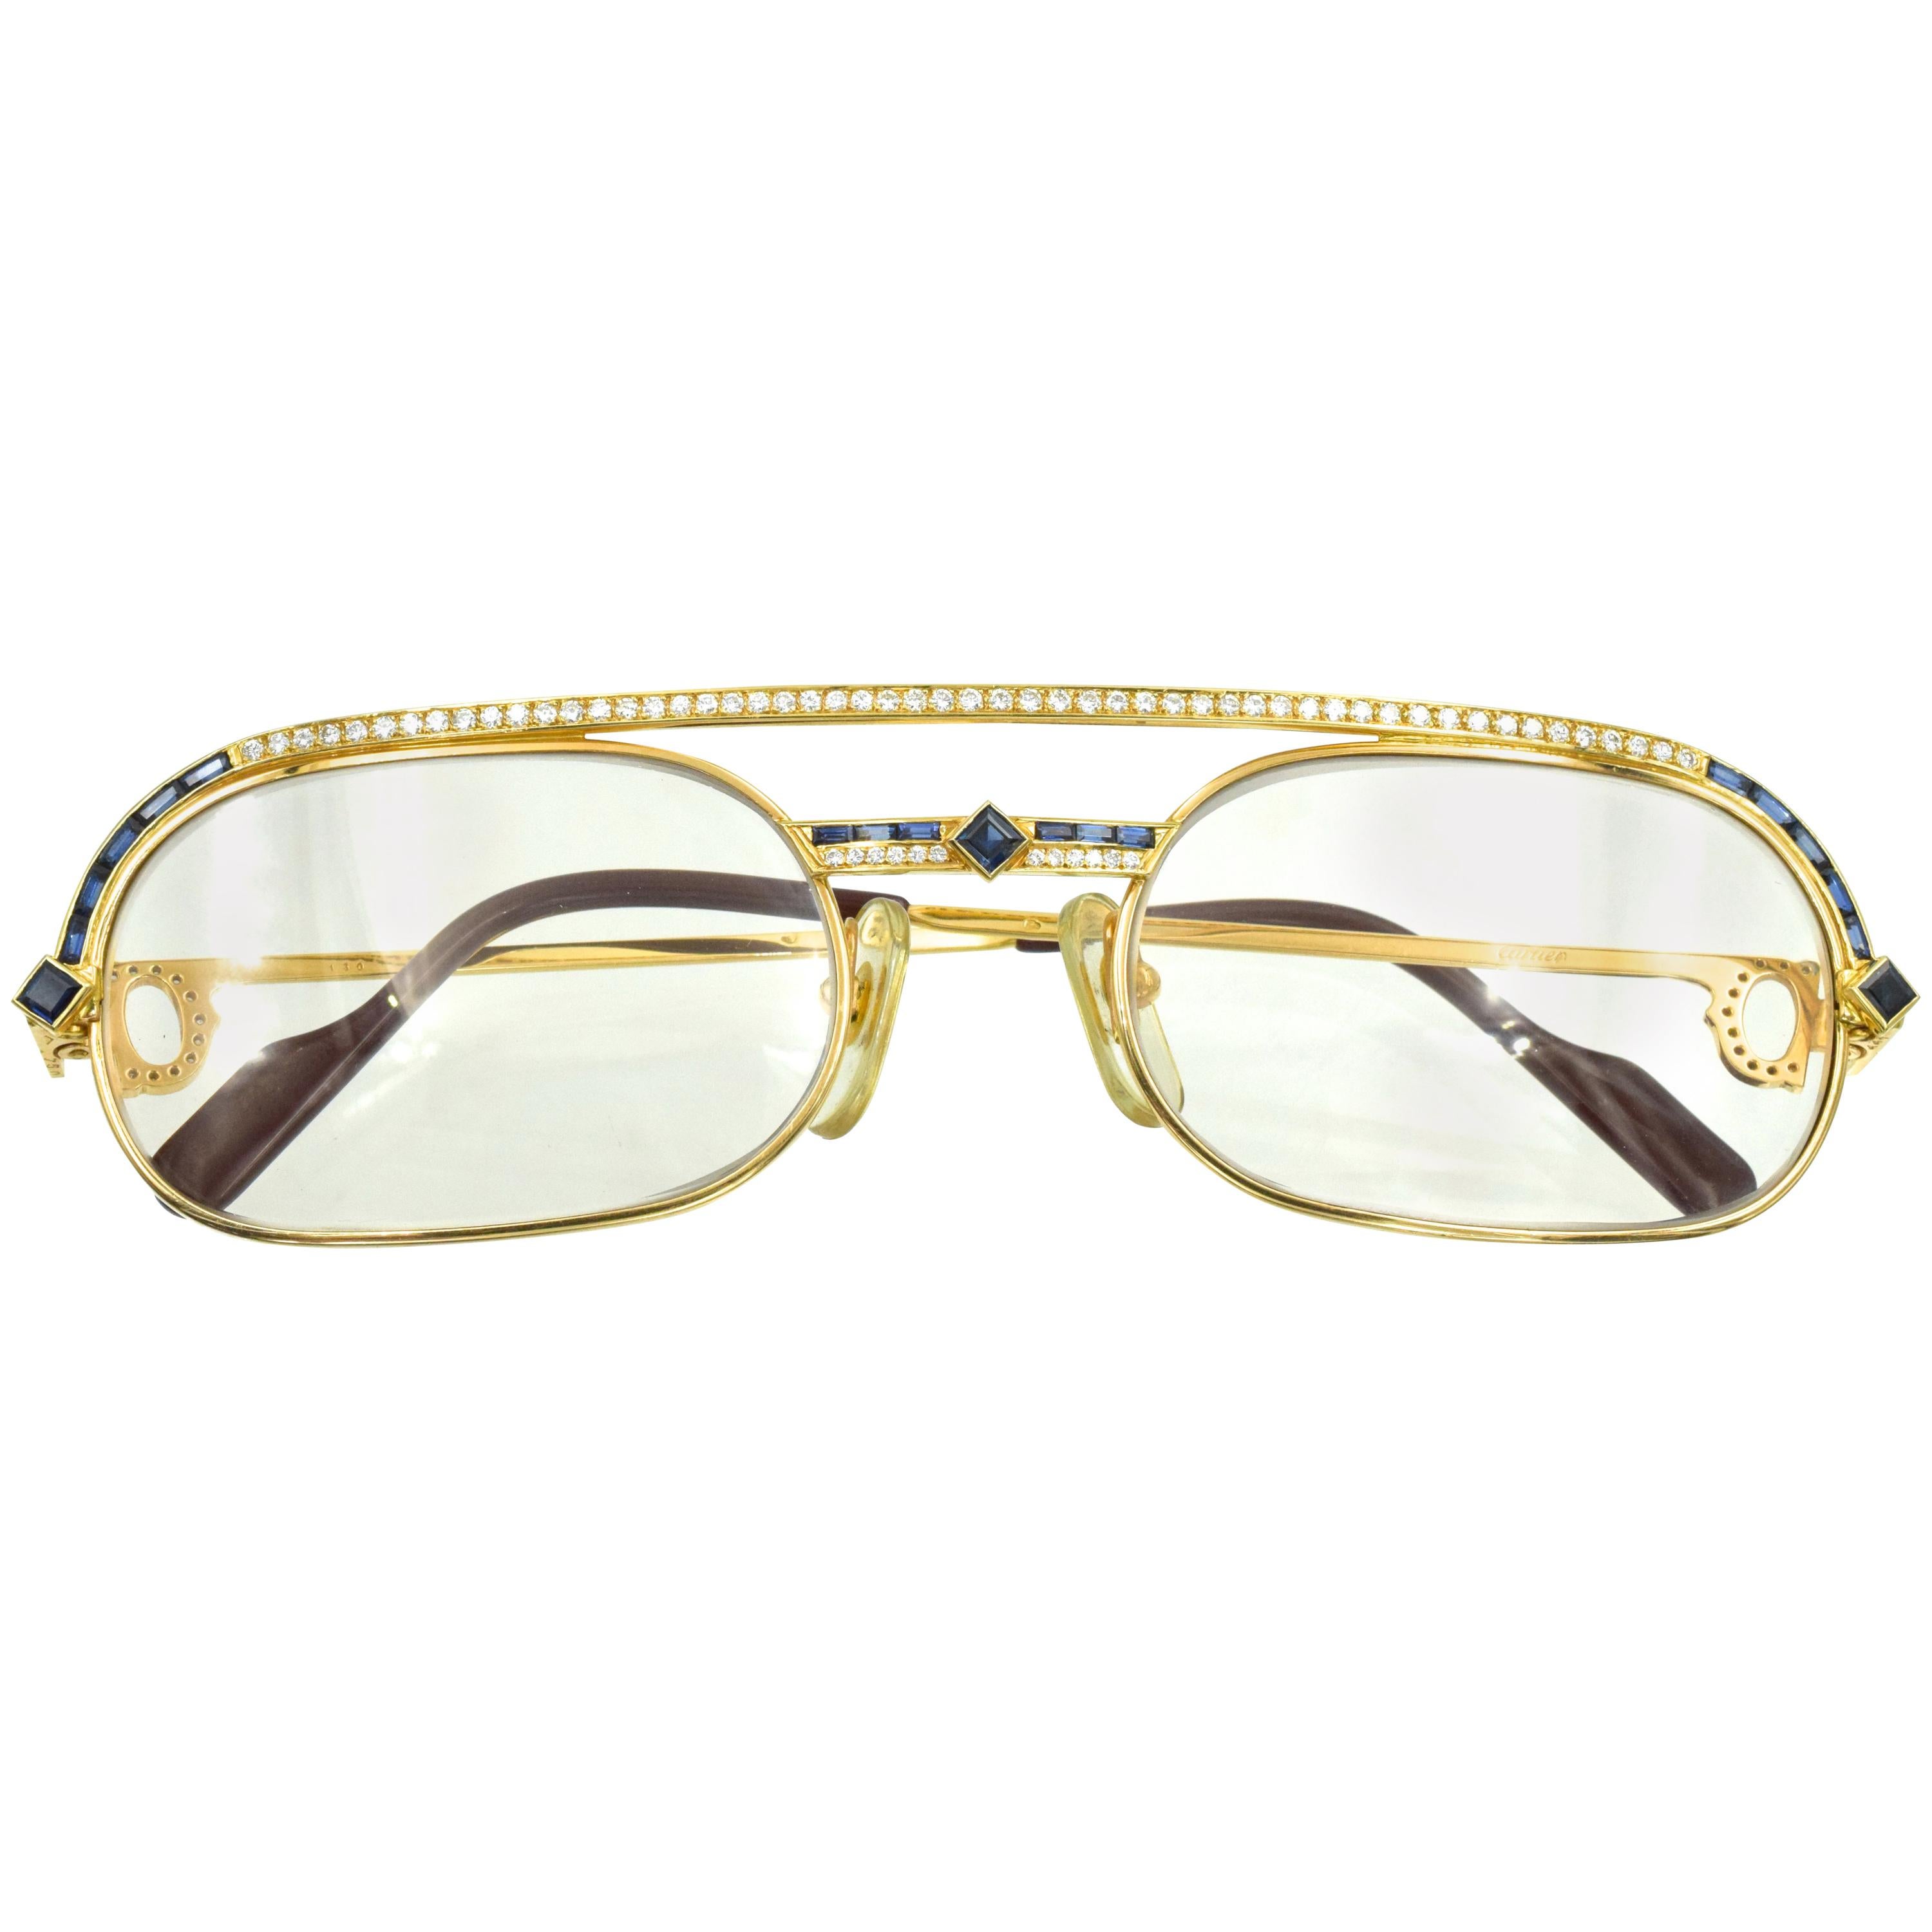 Cartier Gold, Diamond and Sapphire Eyeglasses, France